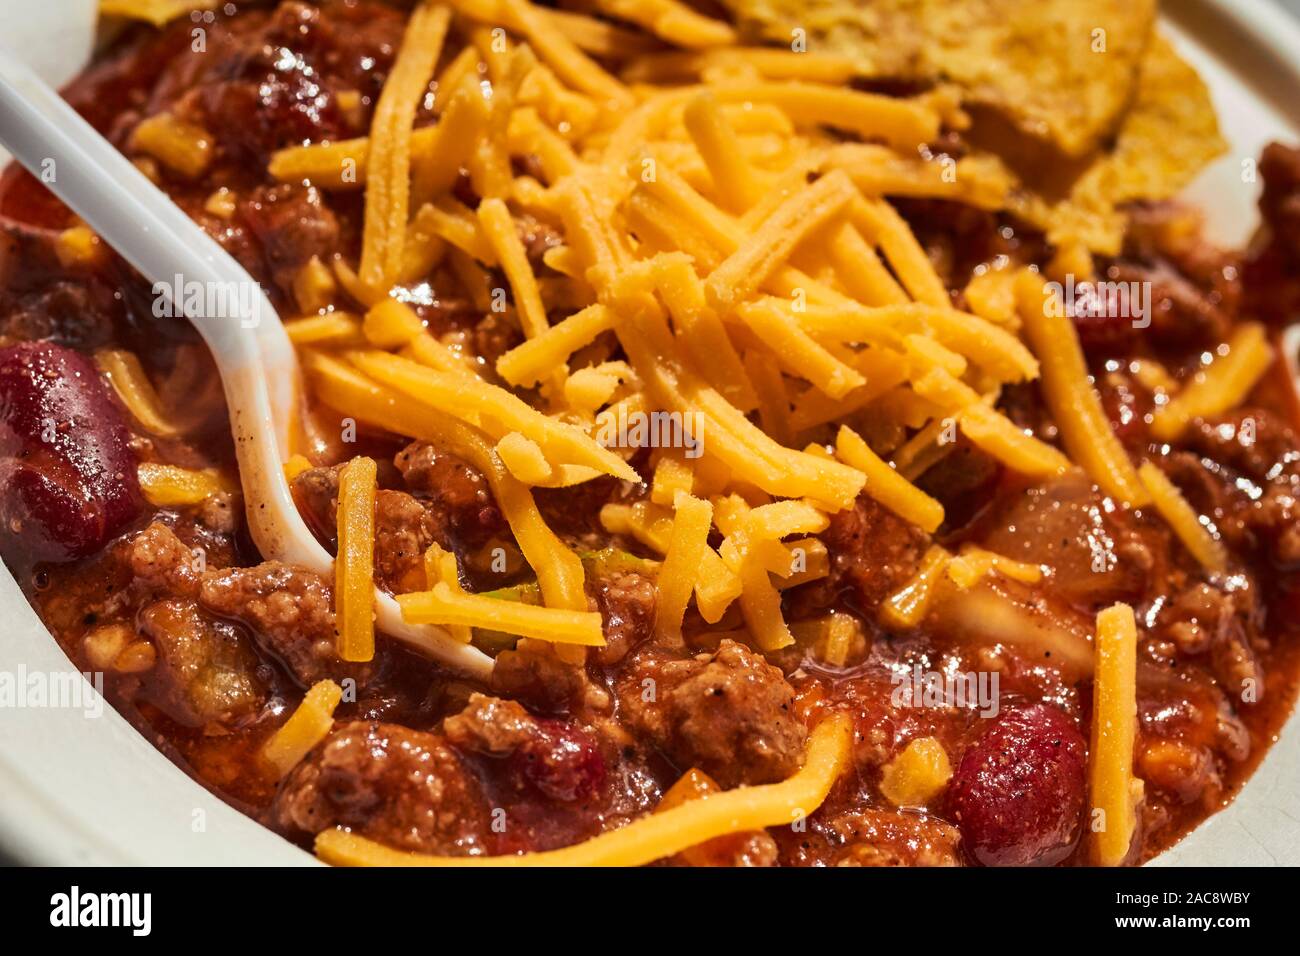 A bowl of chili with shredded yellow cheese Stock Photo